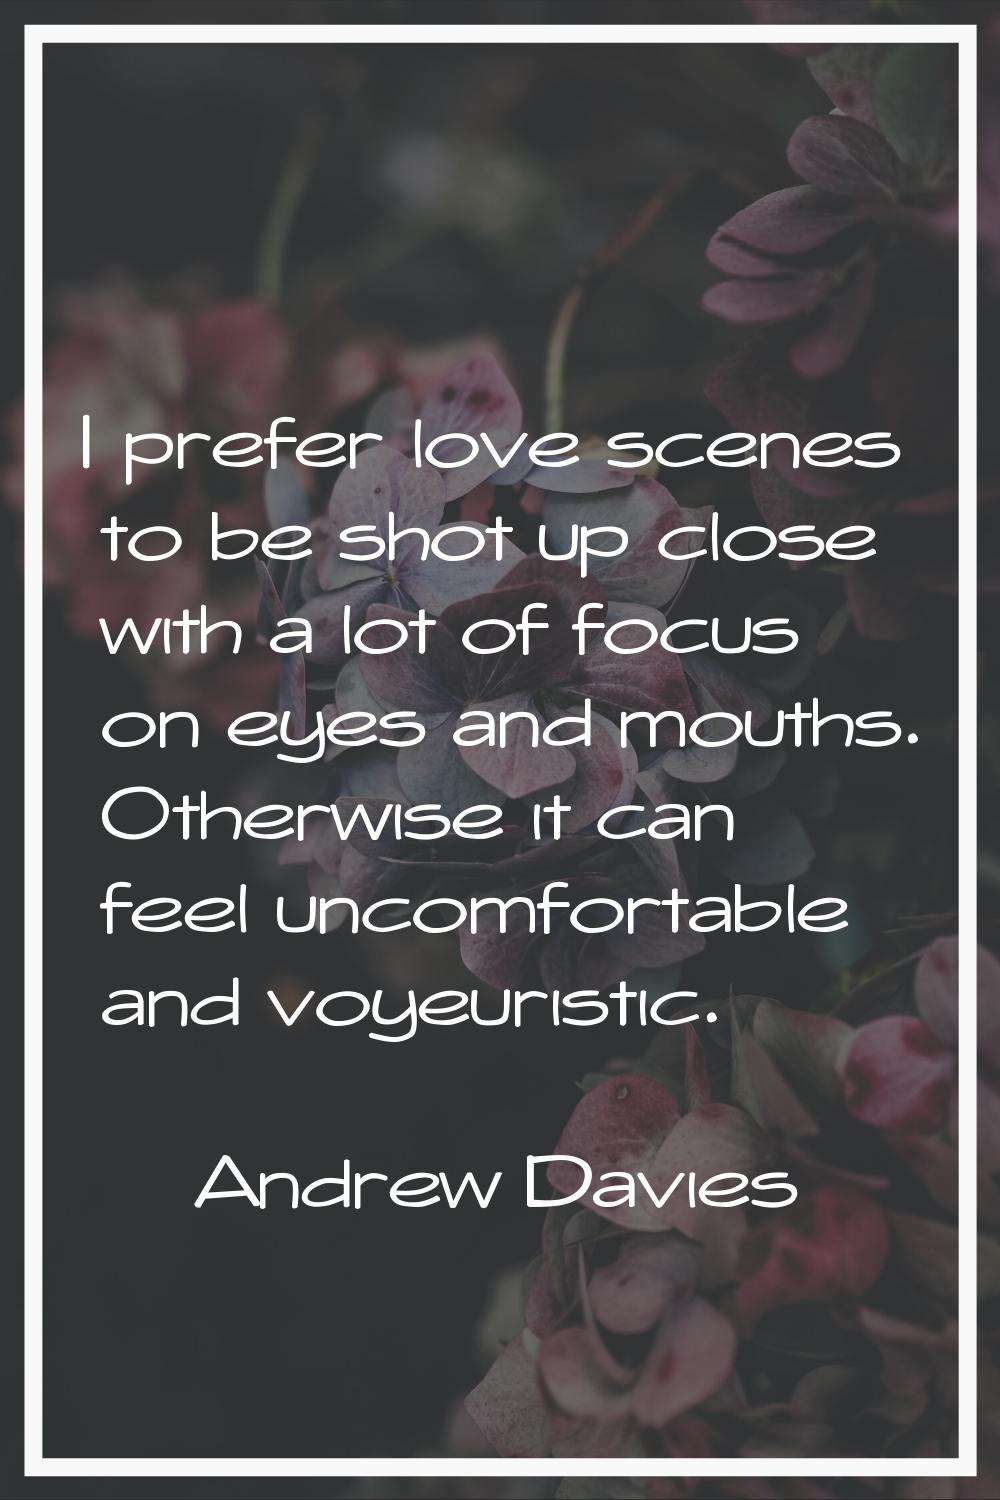 I prefer love scenes to be shot up close with a lot of focus on eyes and mouths. Otherwise it can f